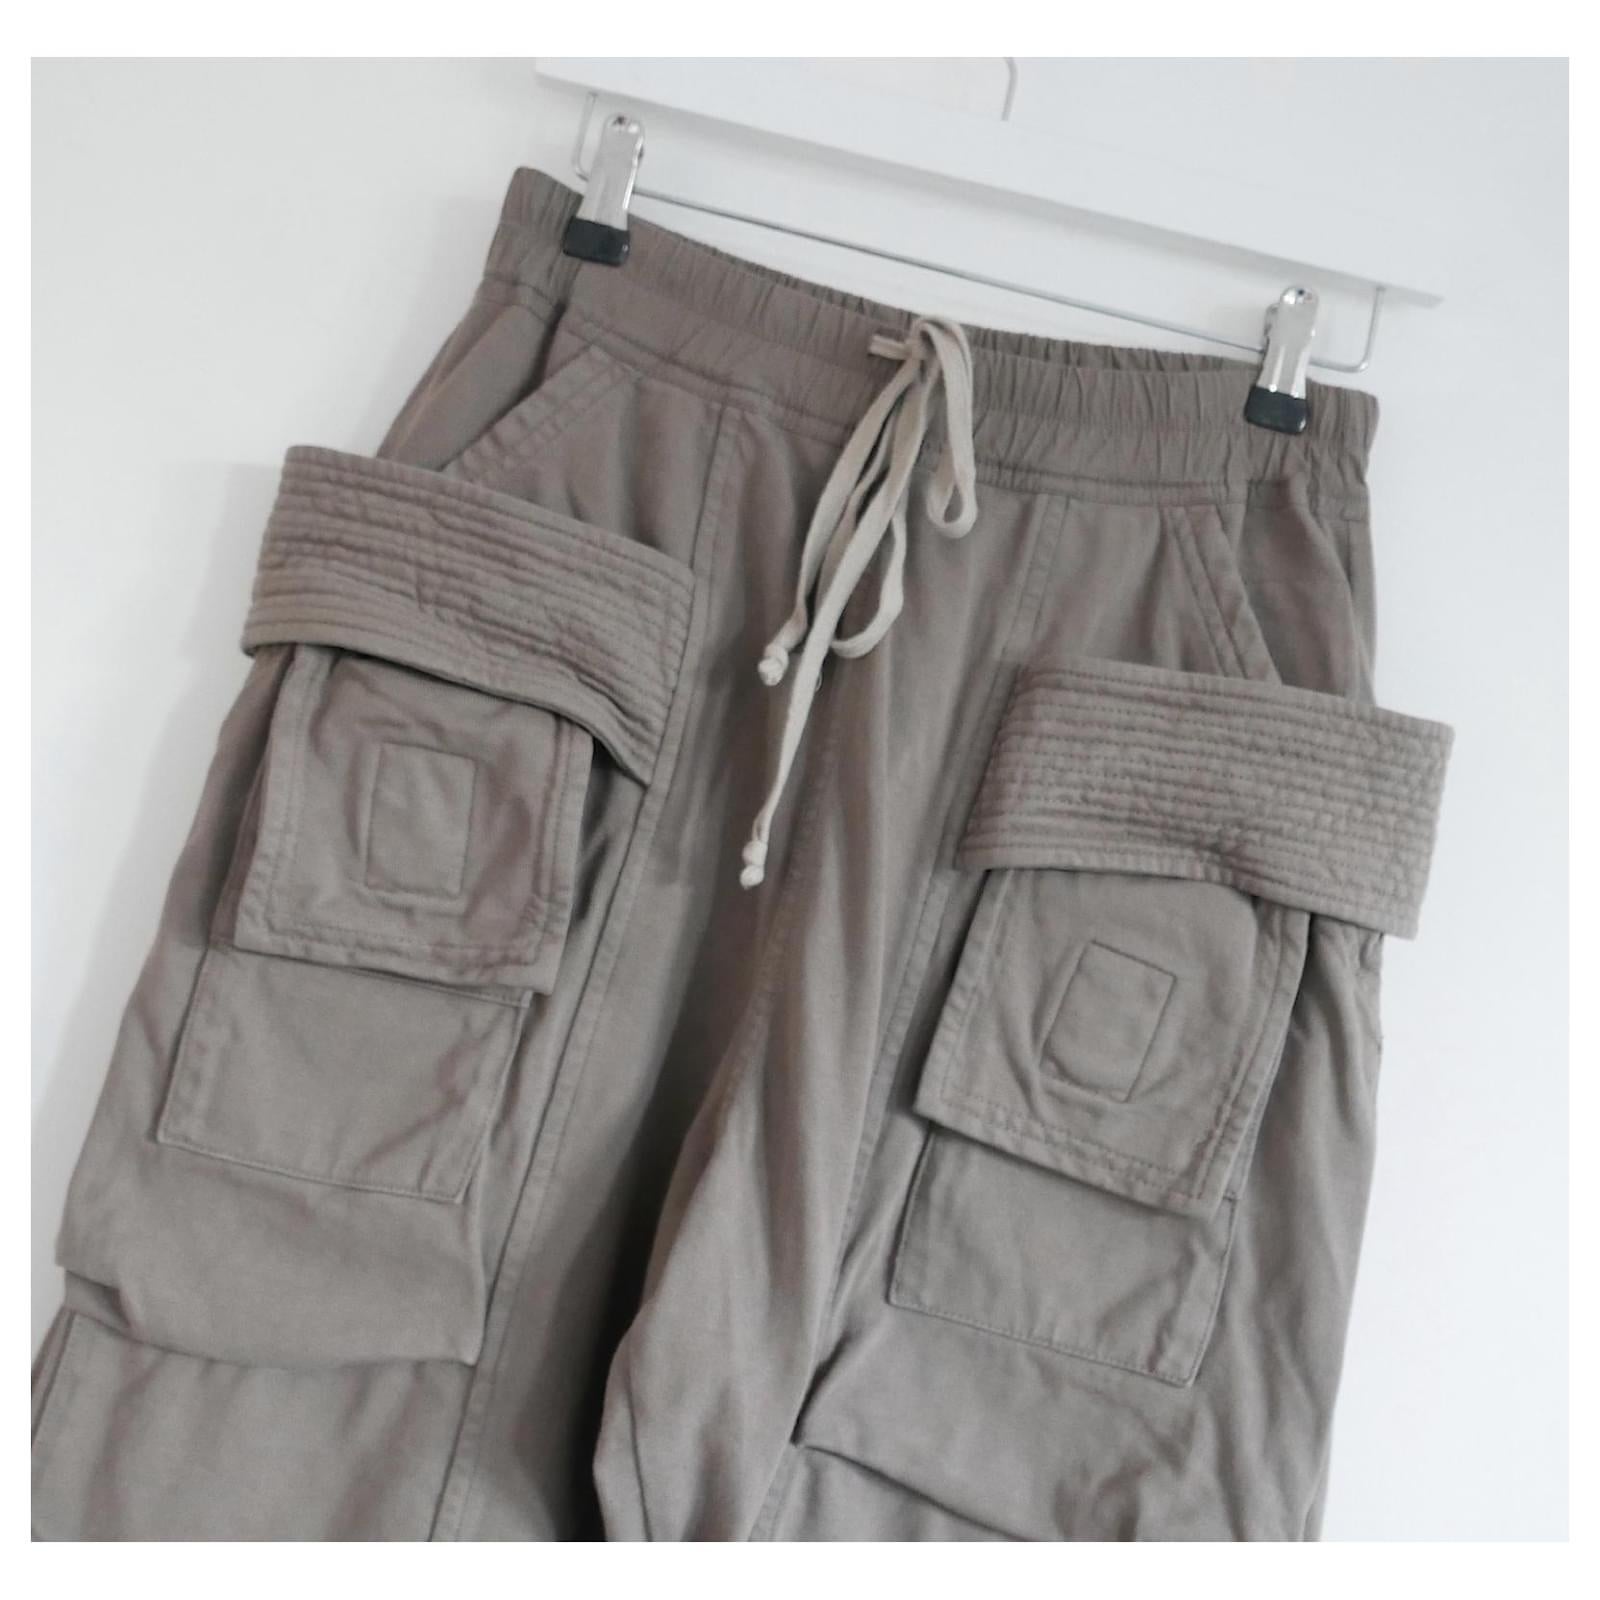 Rick Owens DRKSHDW Creatch Cargo Pants Unisex In Excellent Condition For Sale In London, GB